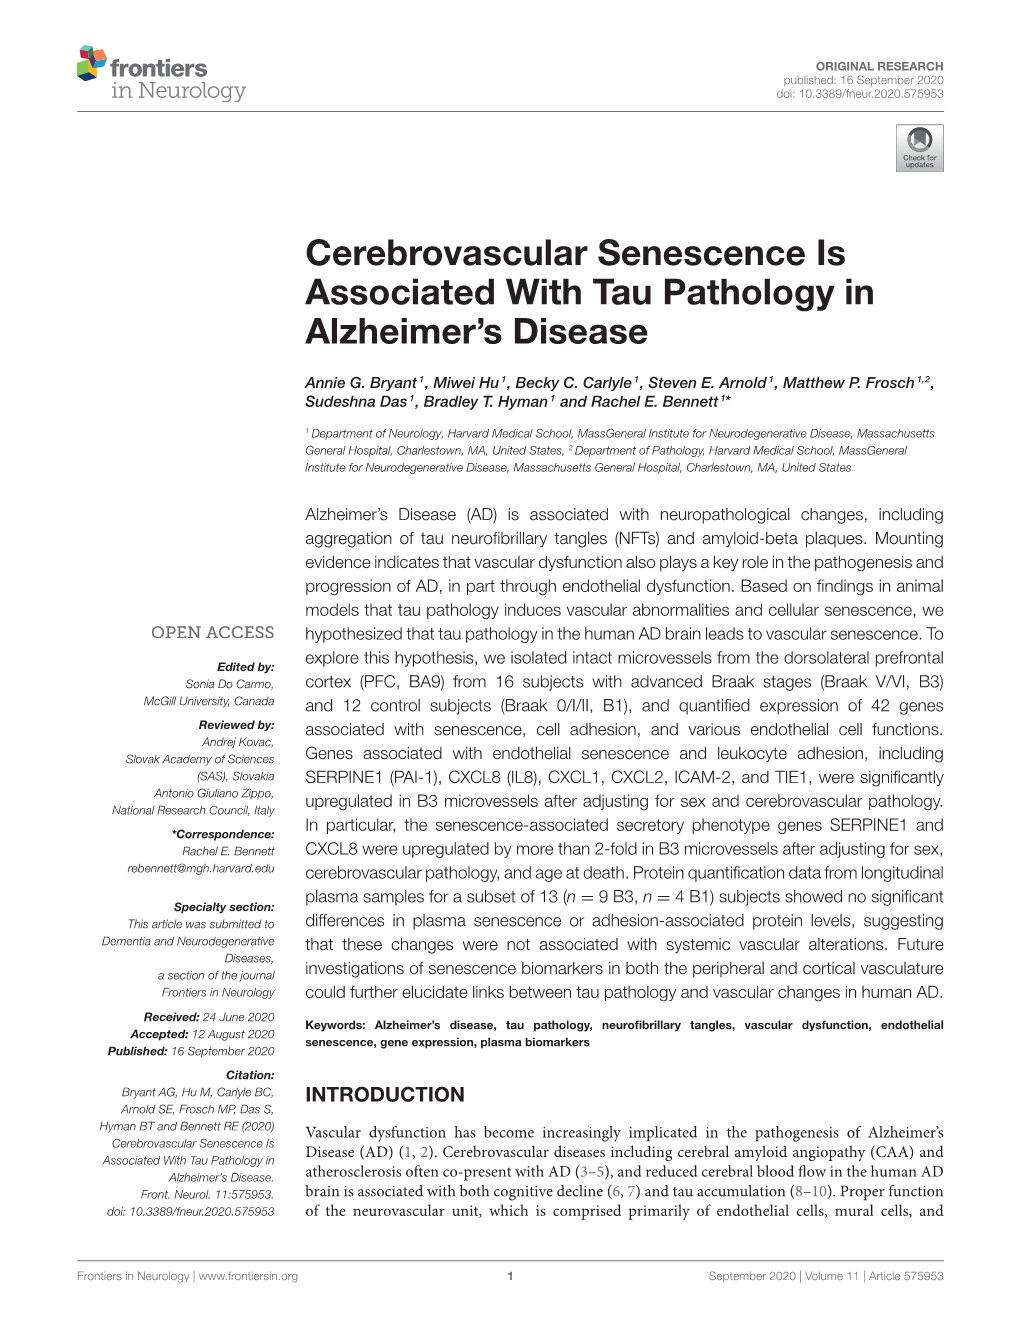 Cerebrovascular Senescence Is Associated with Tau Pathology in Alzheimer’S Disease